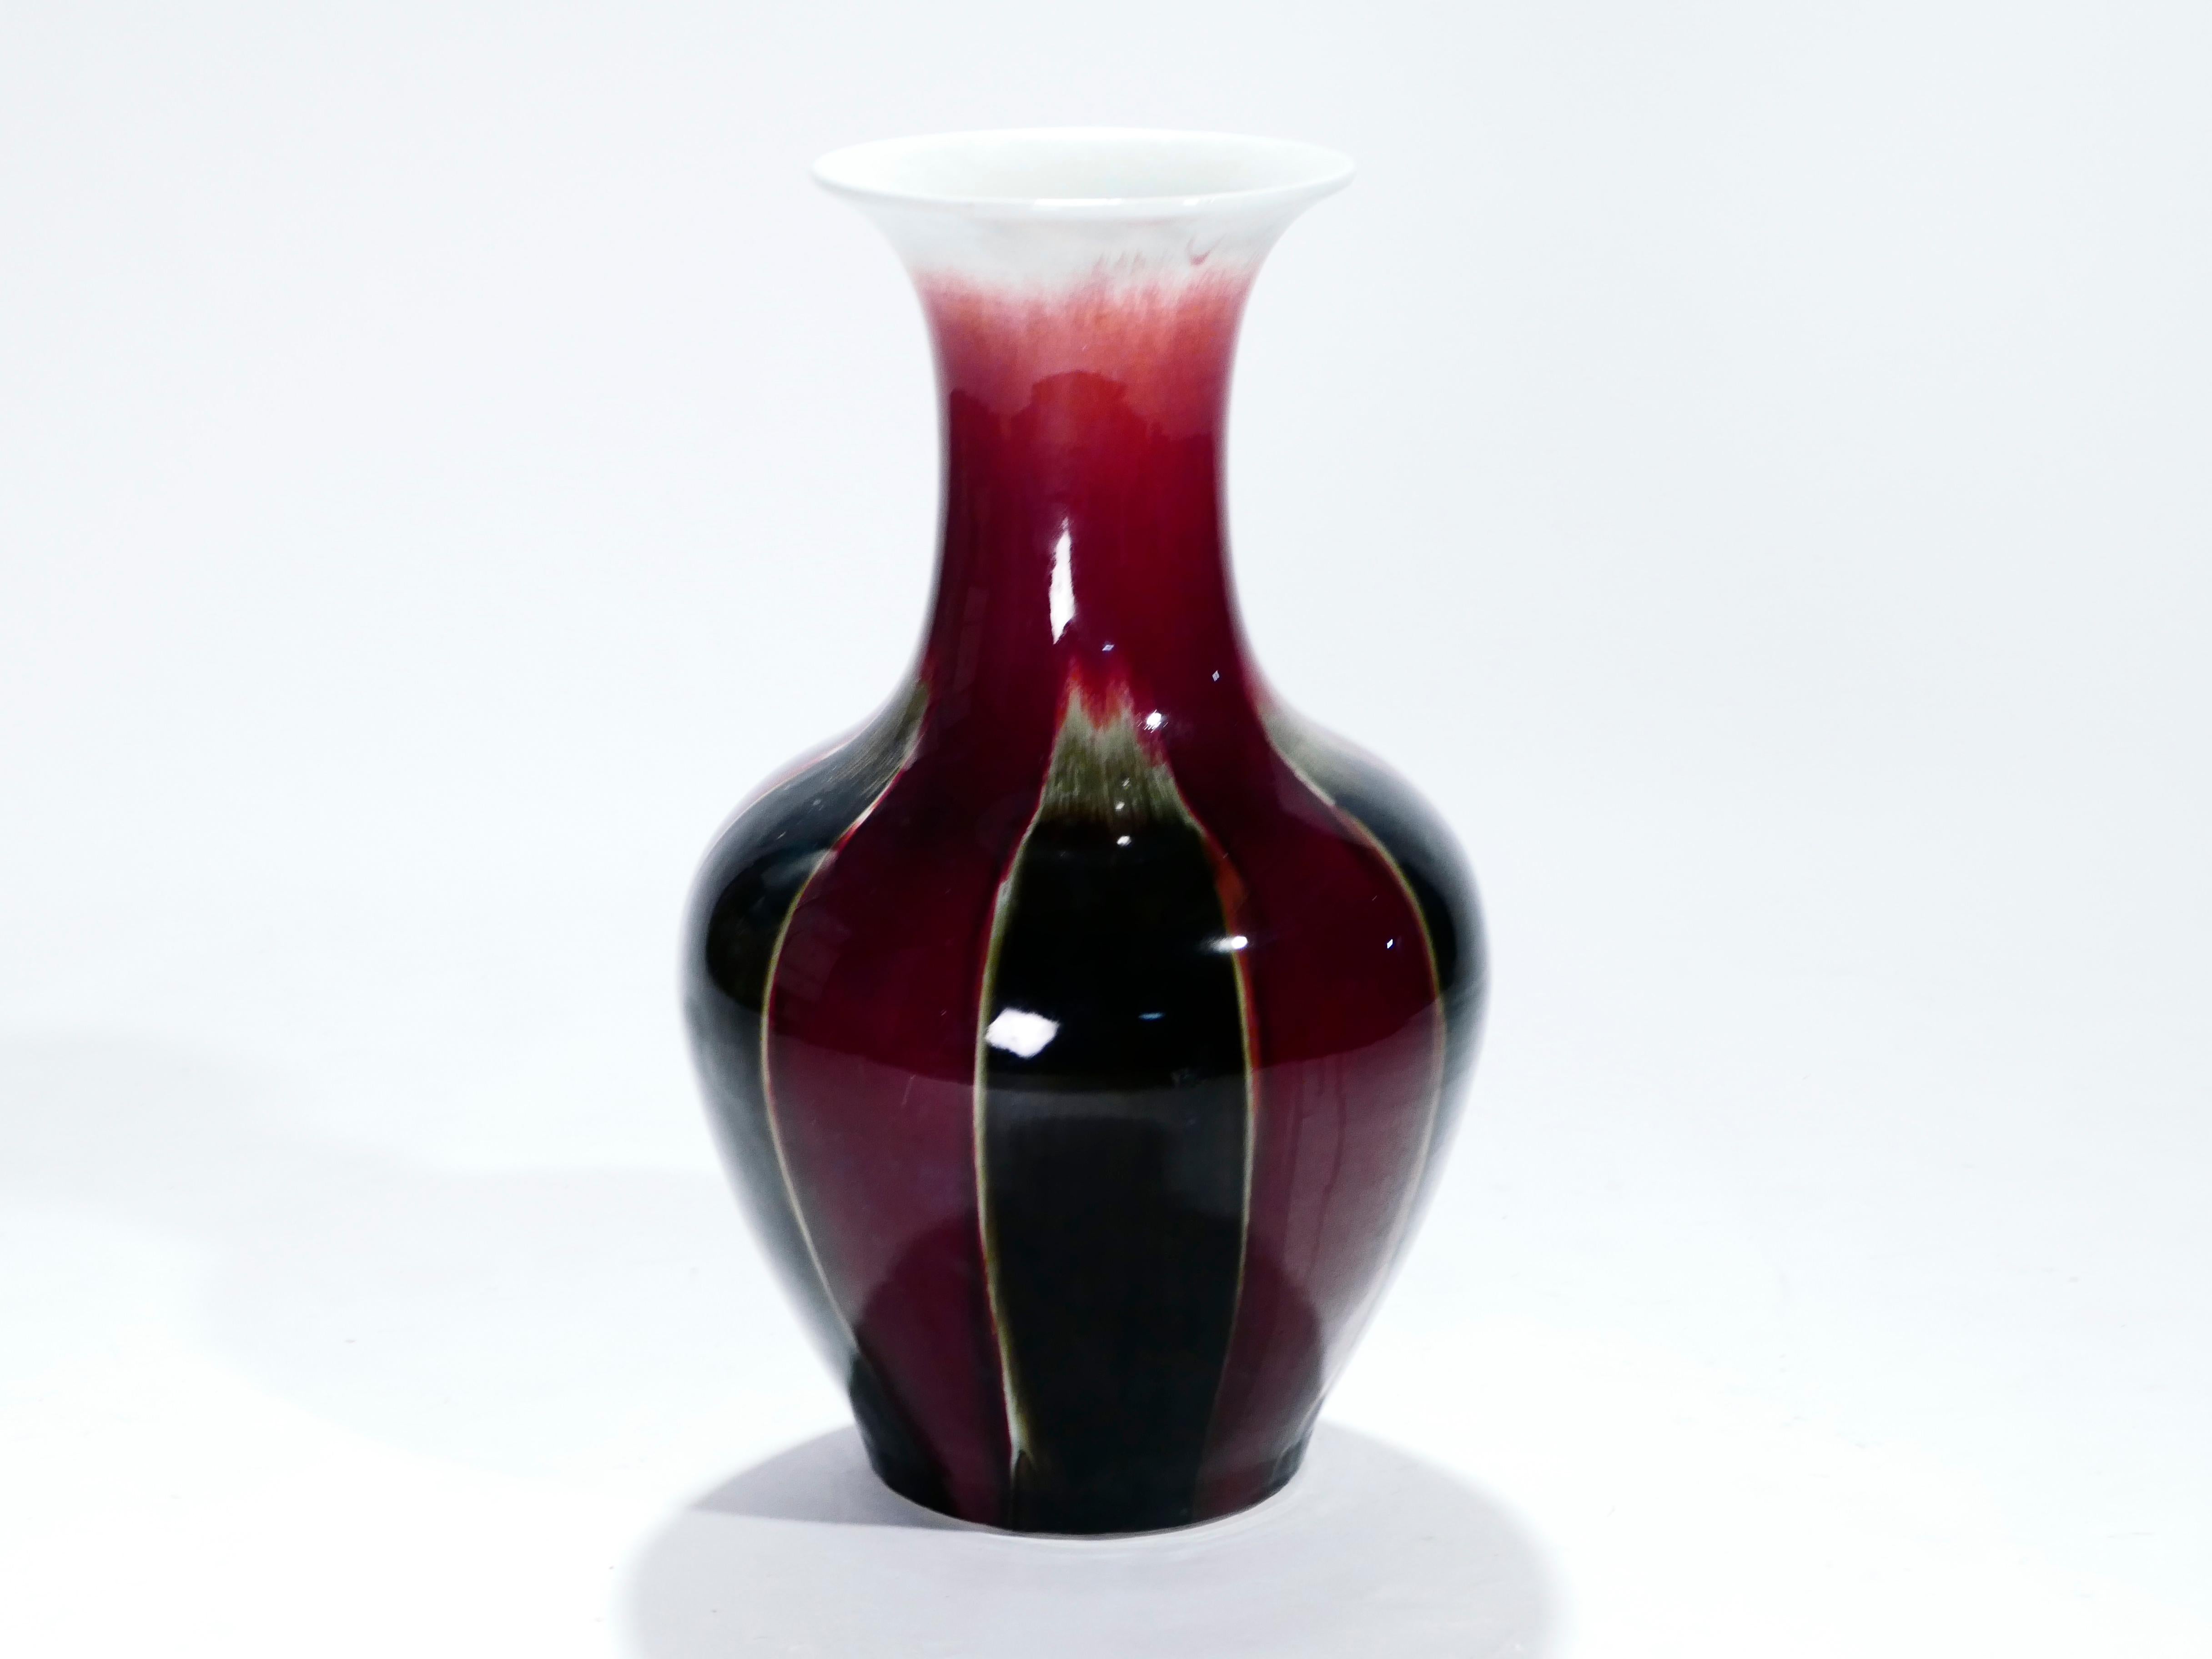 At 67 cms (over 2 ft) tall, this curved vase would be imposing in any space. It was created in the 1960s by a French ceramicist with an ample body and energetic trumpet neck. The rich colors err on the side of dark. Sang de boeuf, or flambé glaze,